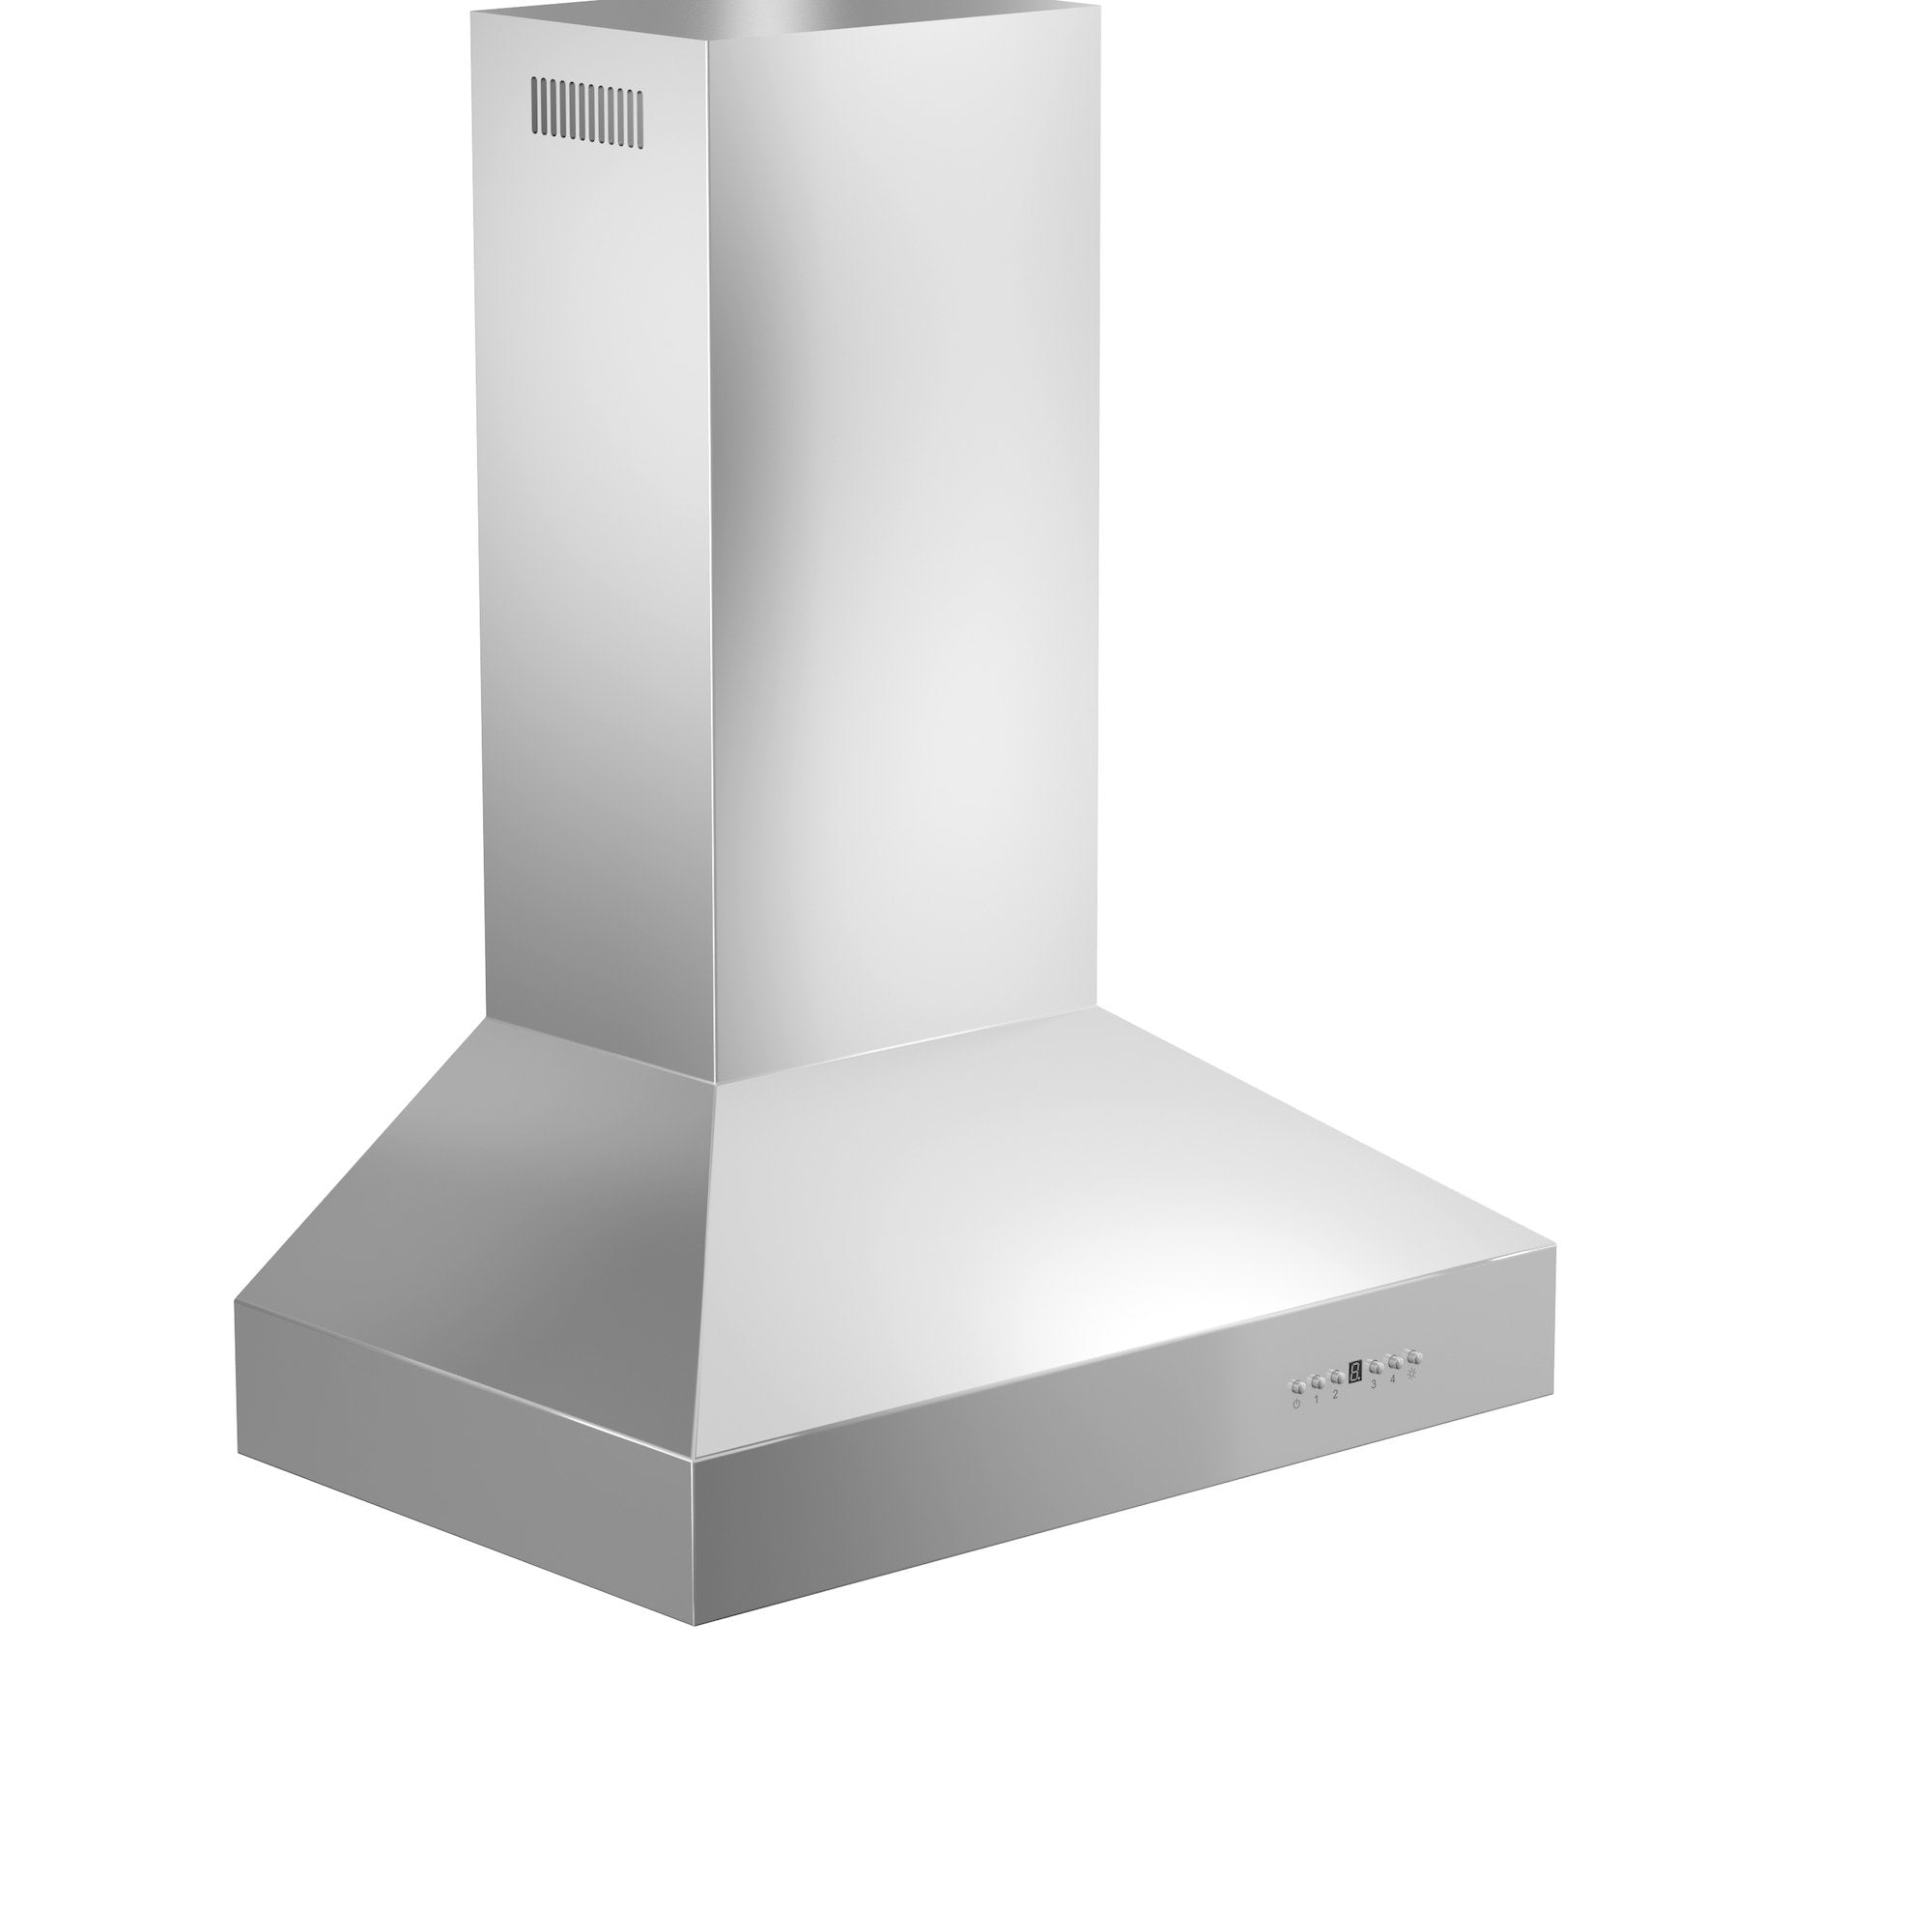 ZLINE 42" Professional Ducted Vent Wall Mount Range Hood in Stainless Steel (667-42)